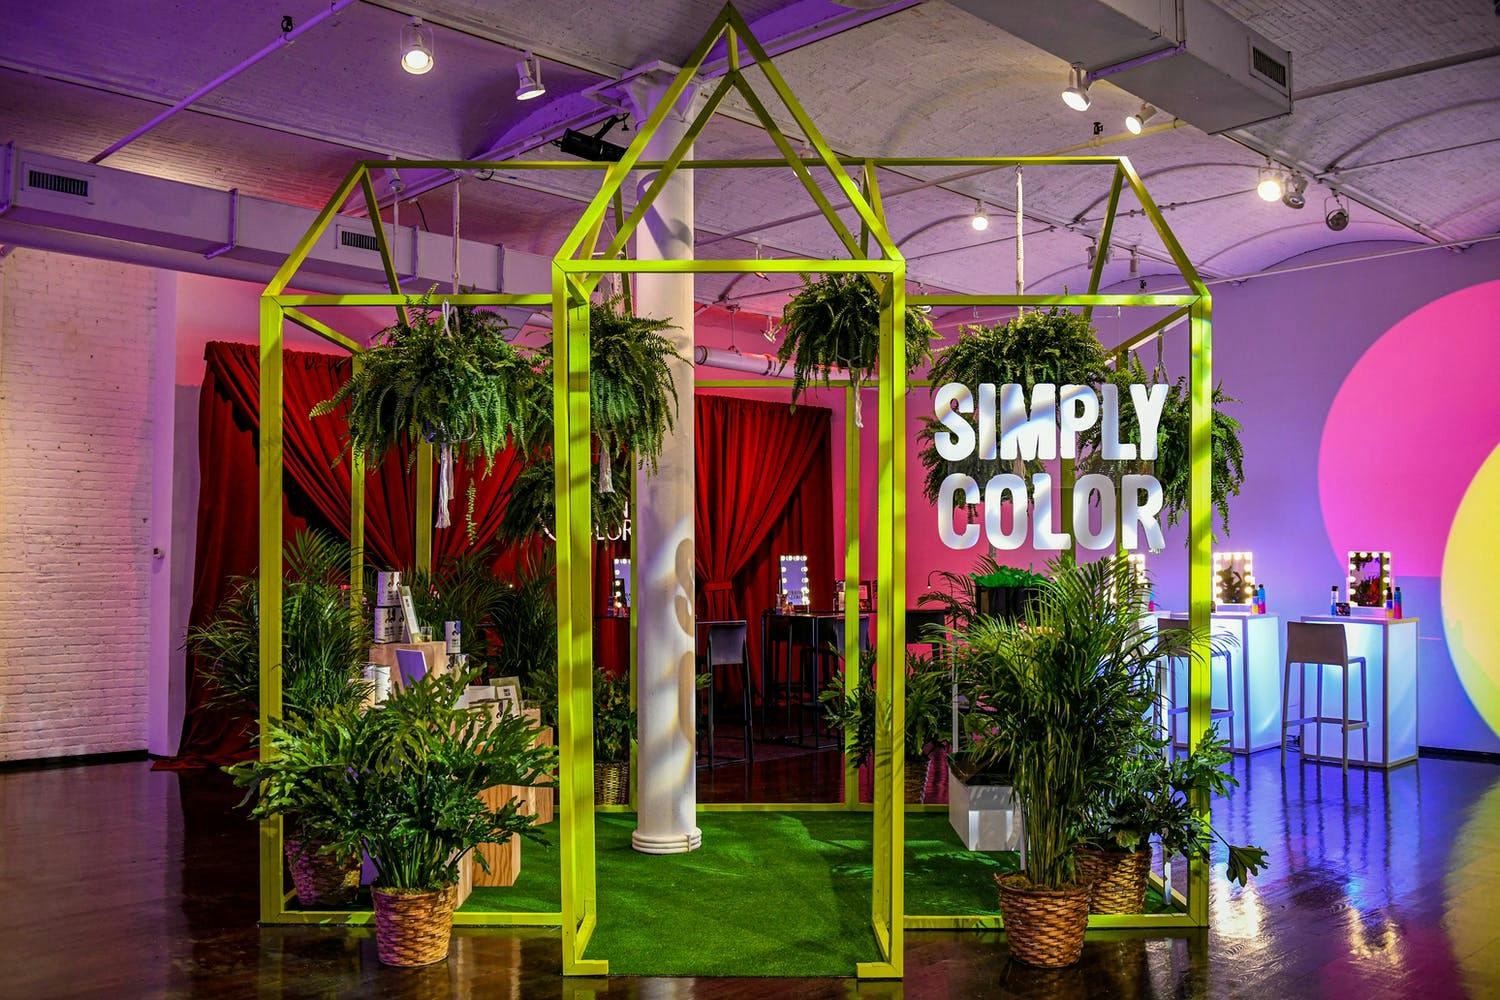 “Simply Color” walk-in product display that doubles as a unique photo op | PartySlate